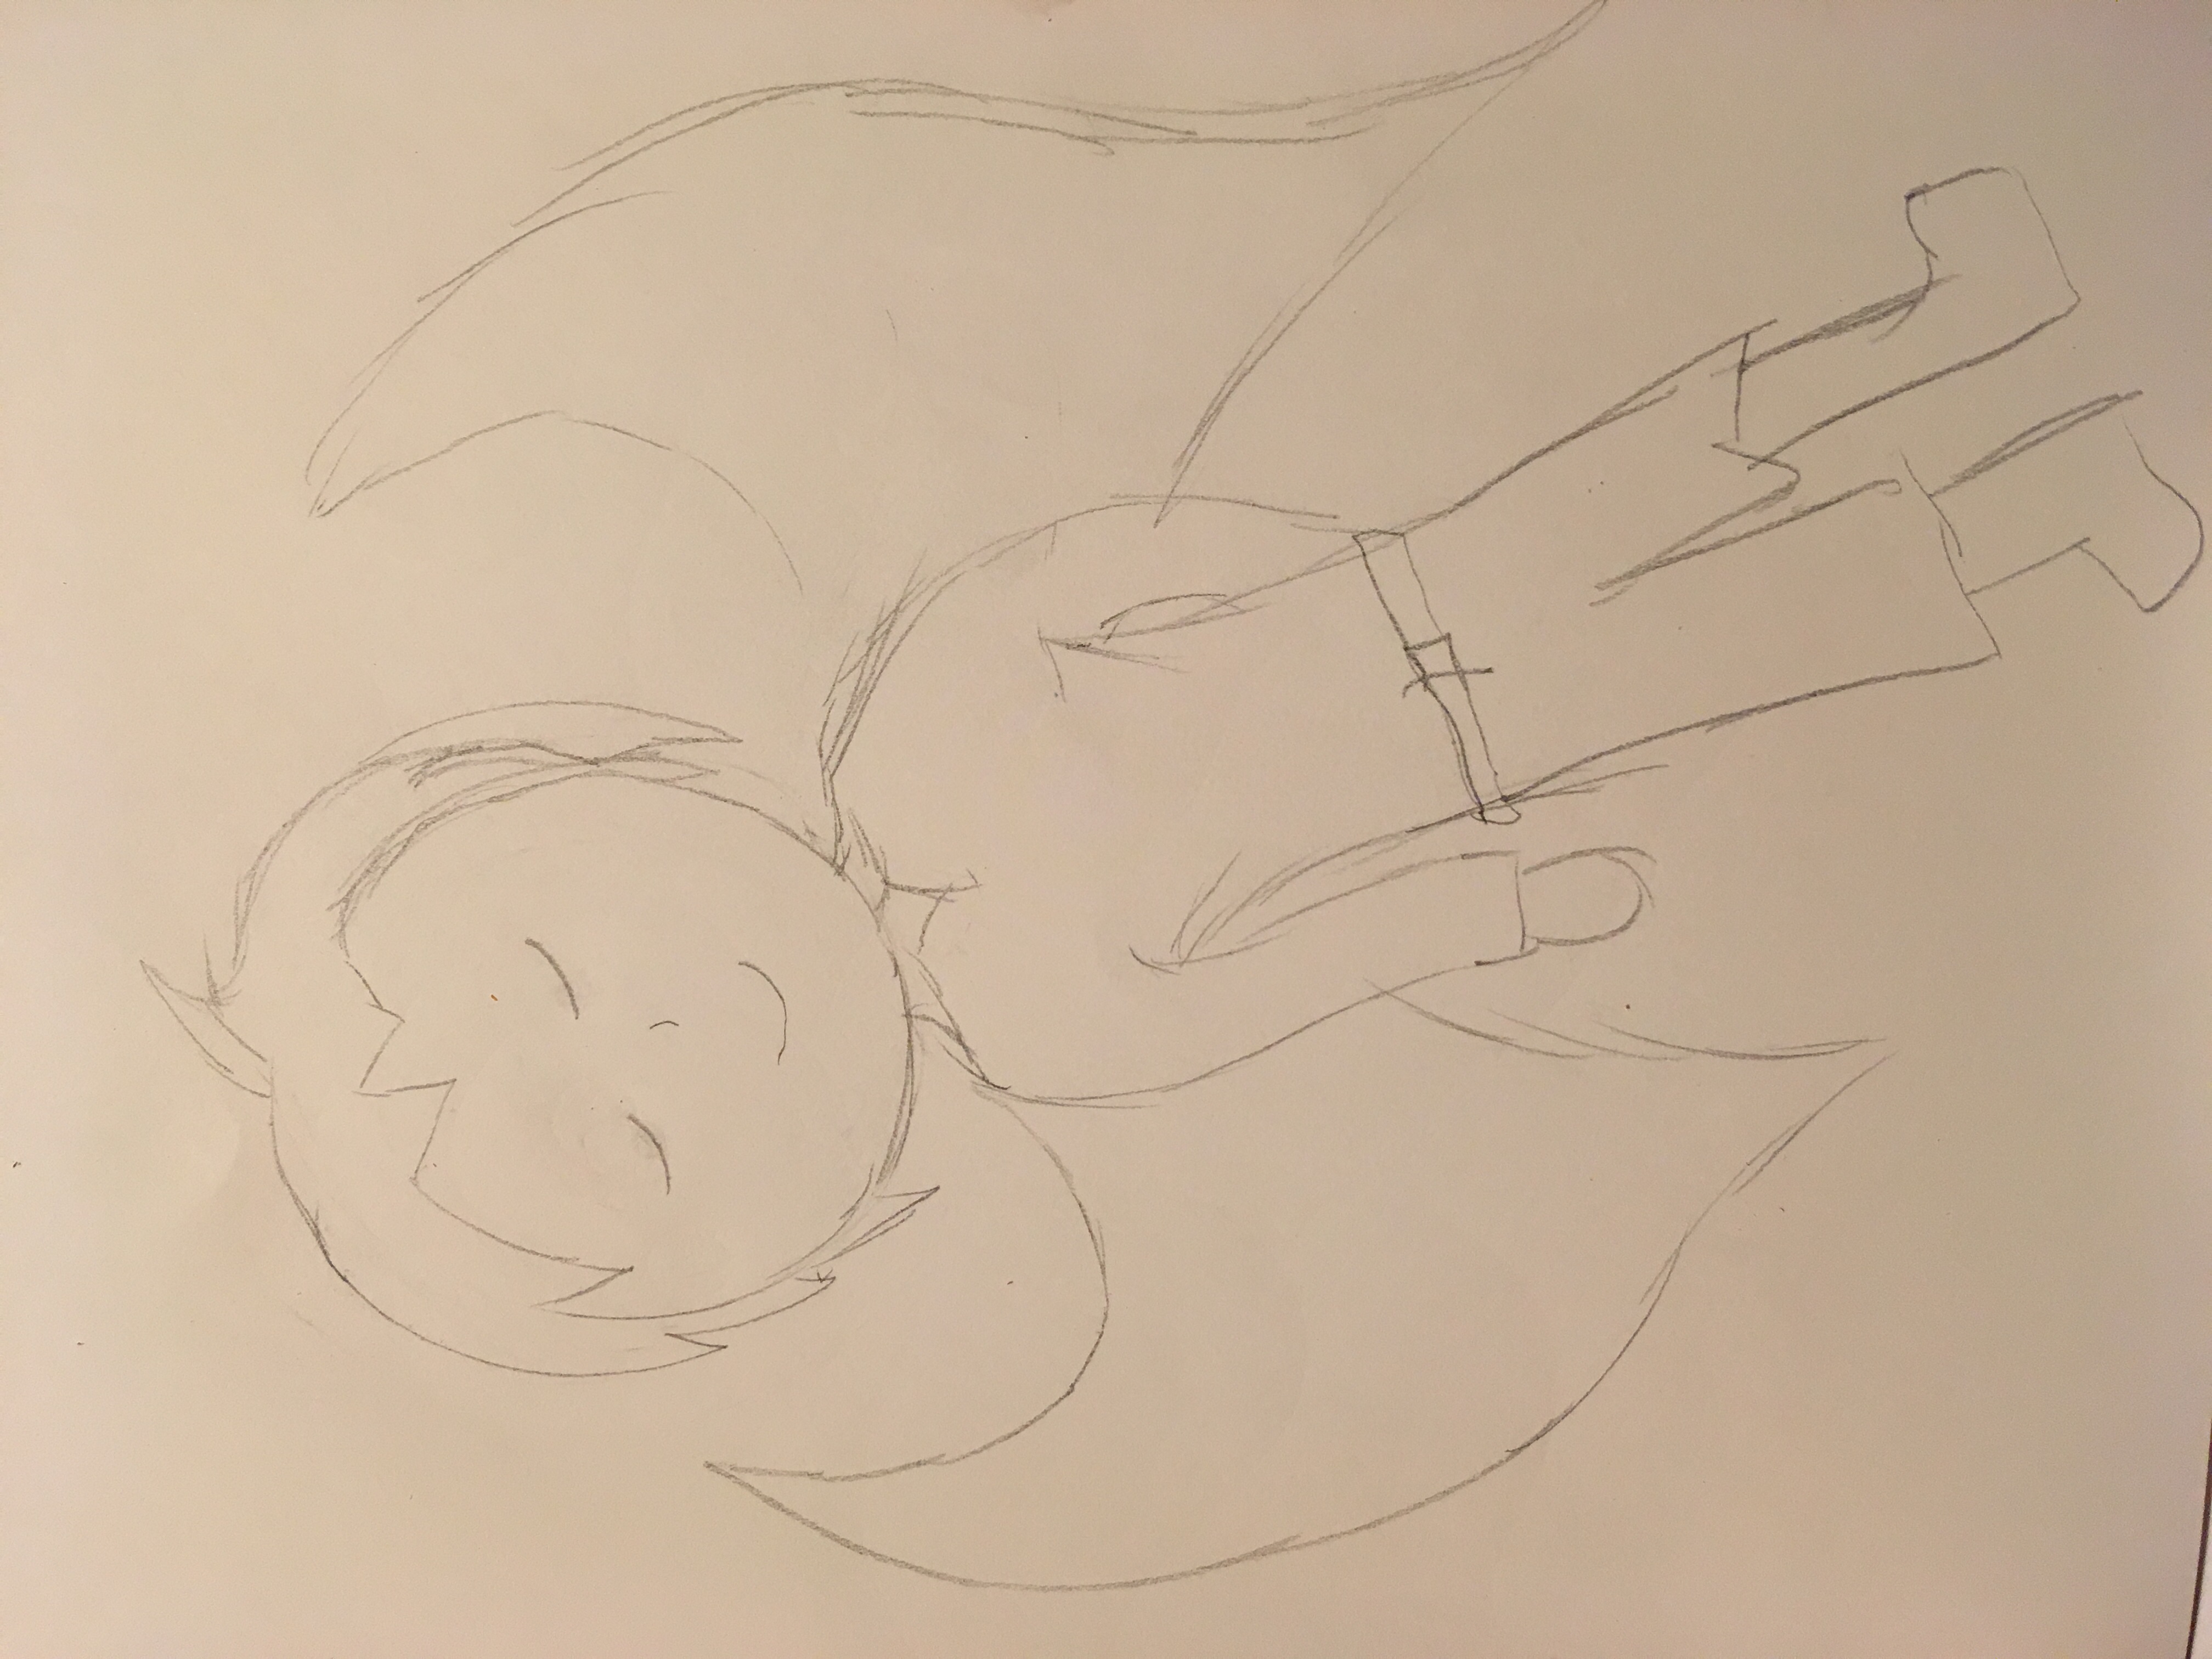 Sketch of little boy with wings cartoon anime style pencil